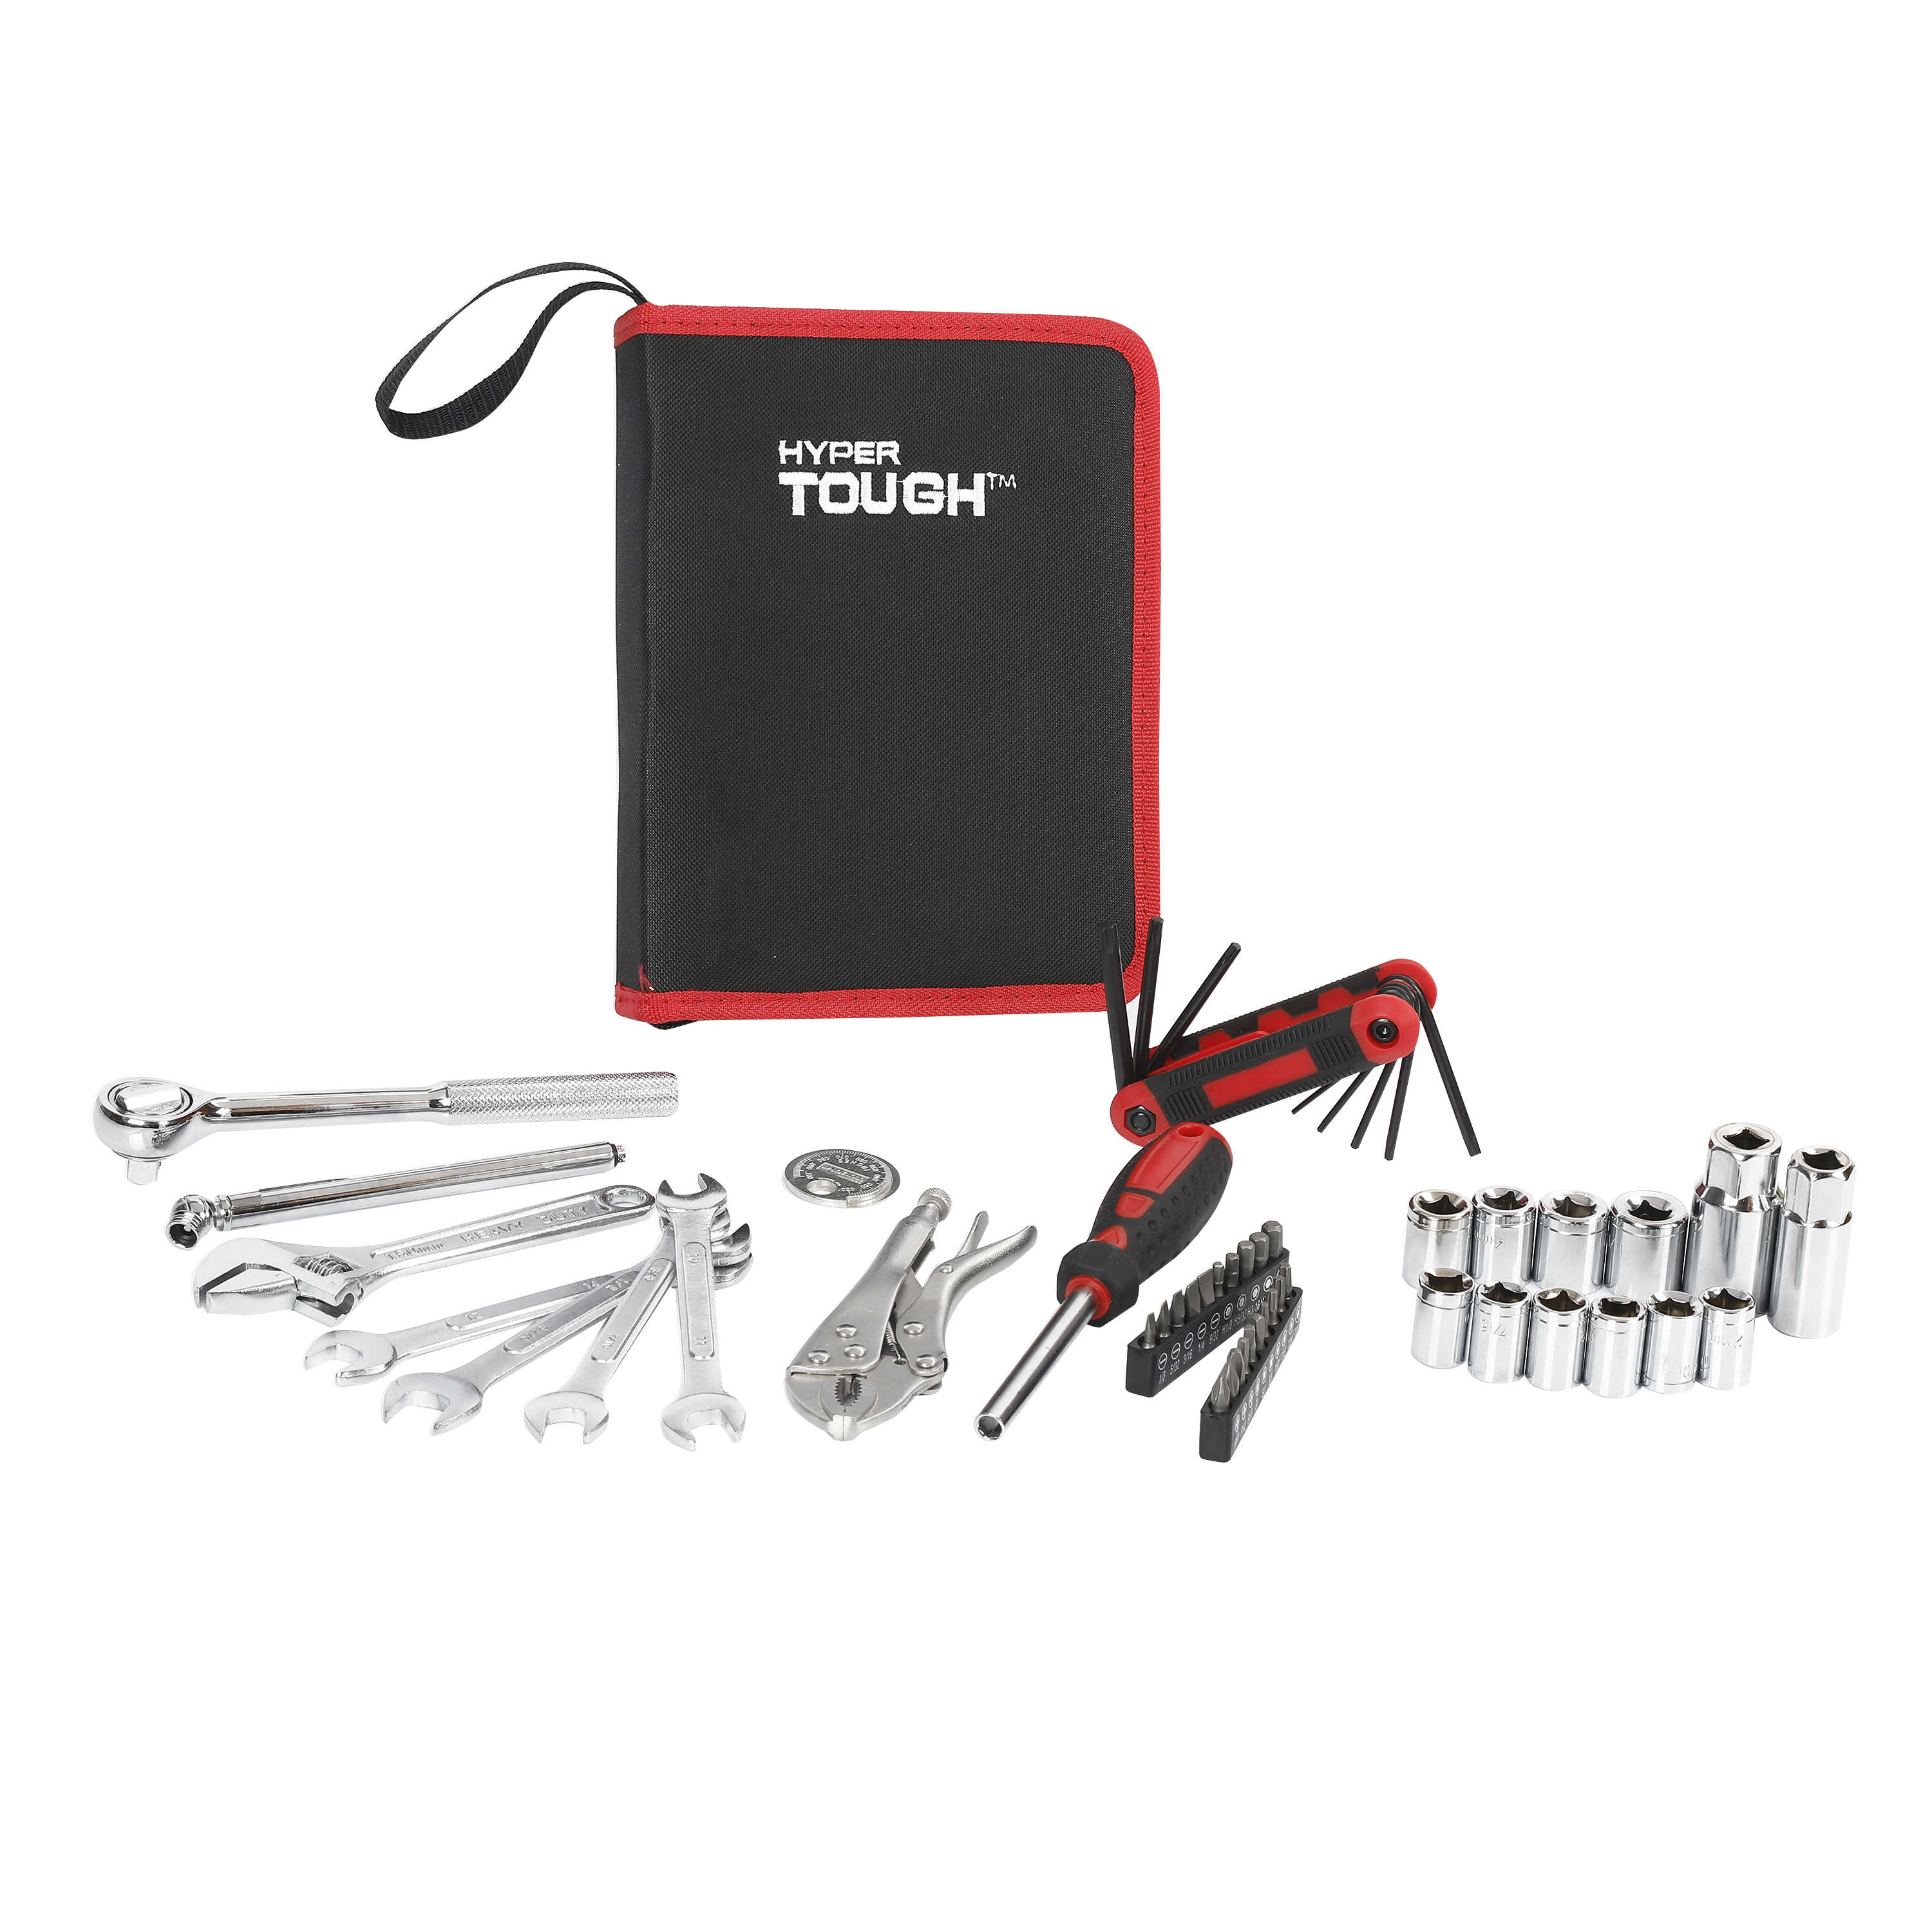 Hyper Tough Ht 51-piece Auto And Motorcycle Tool Kit